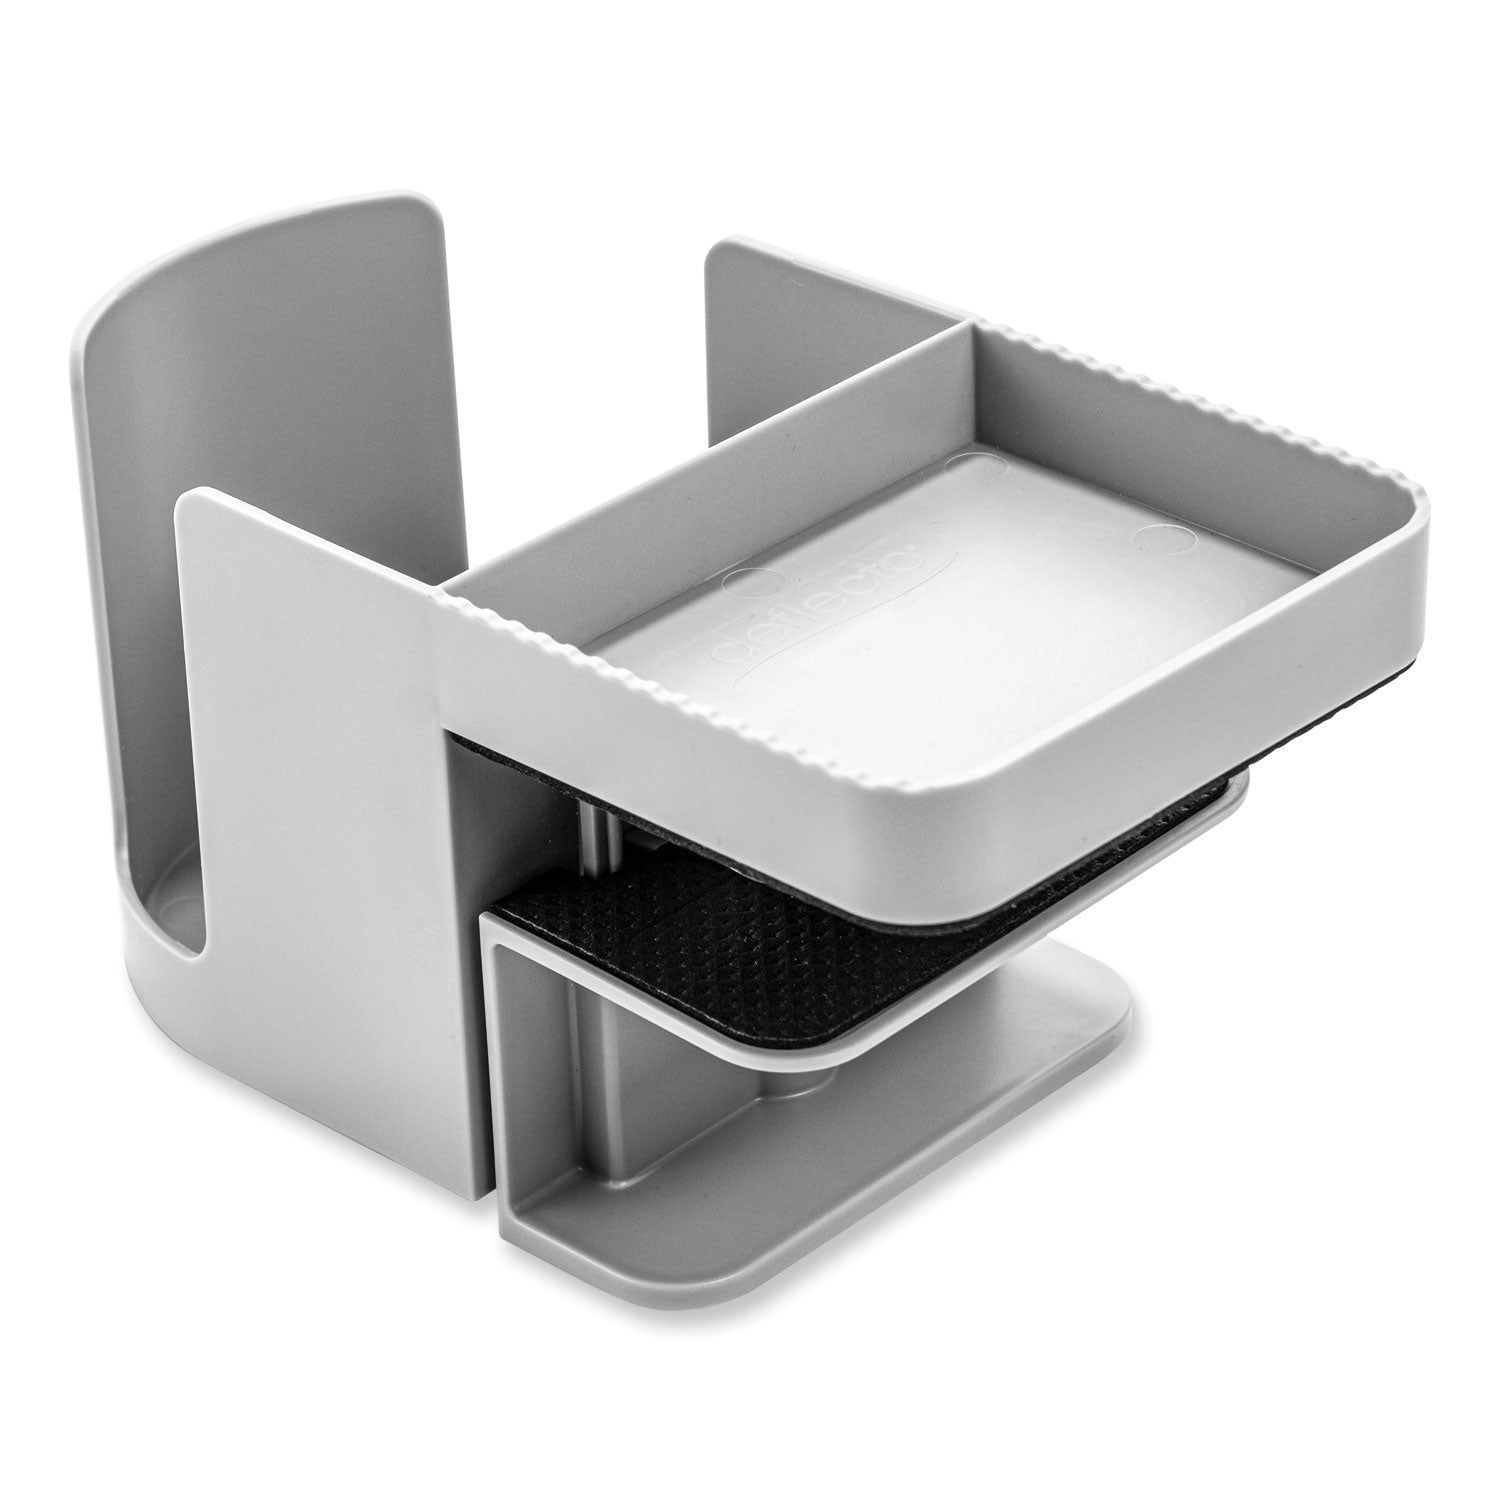 standing-desk-cup-holder-organizer-two-sections-394-x-704-x-354-gray_def400000 - 1